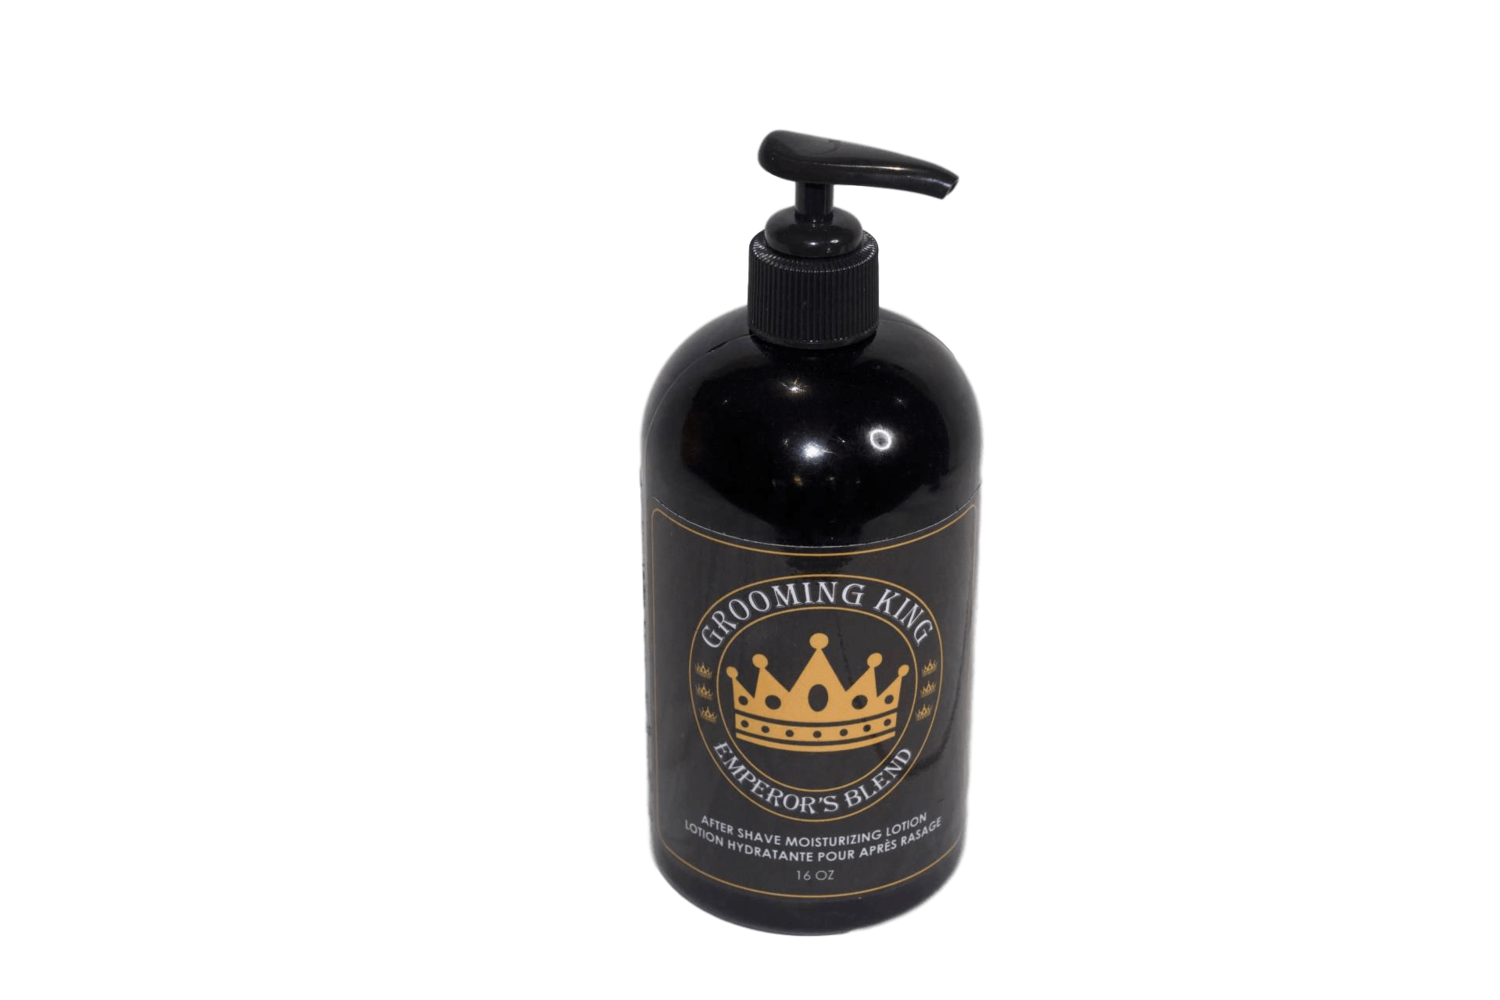 Grooming King After Shave Moisturizing Lotion